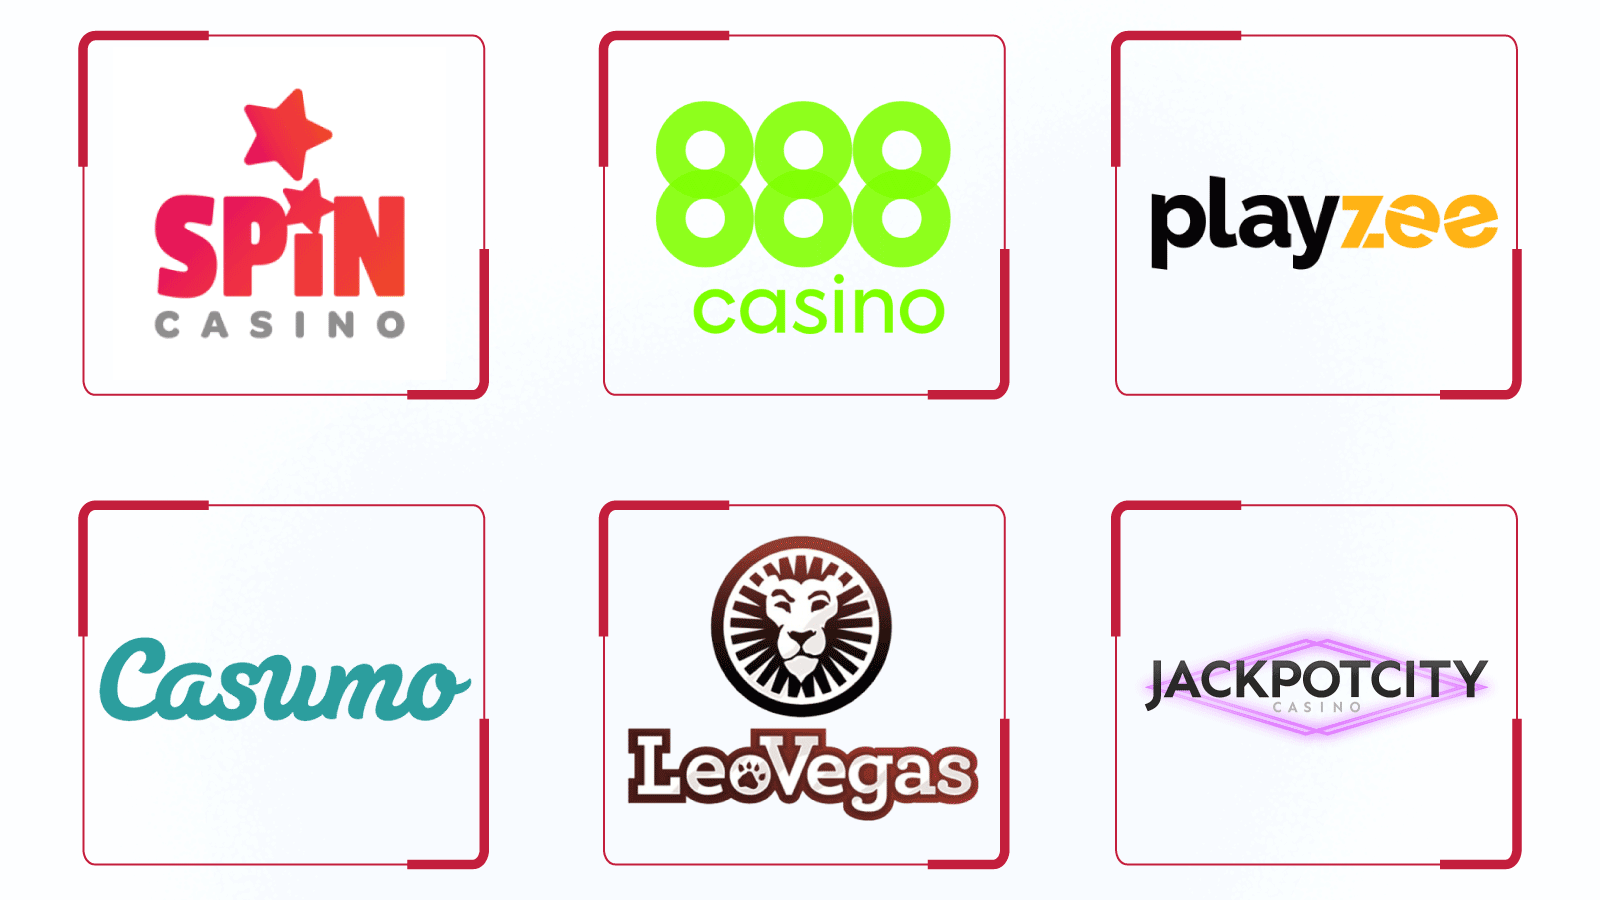 Article page on online casino - important information